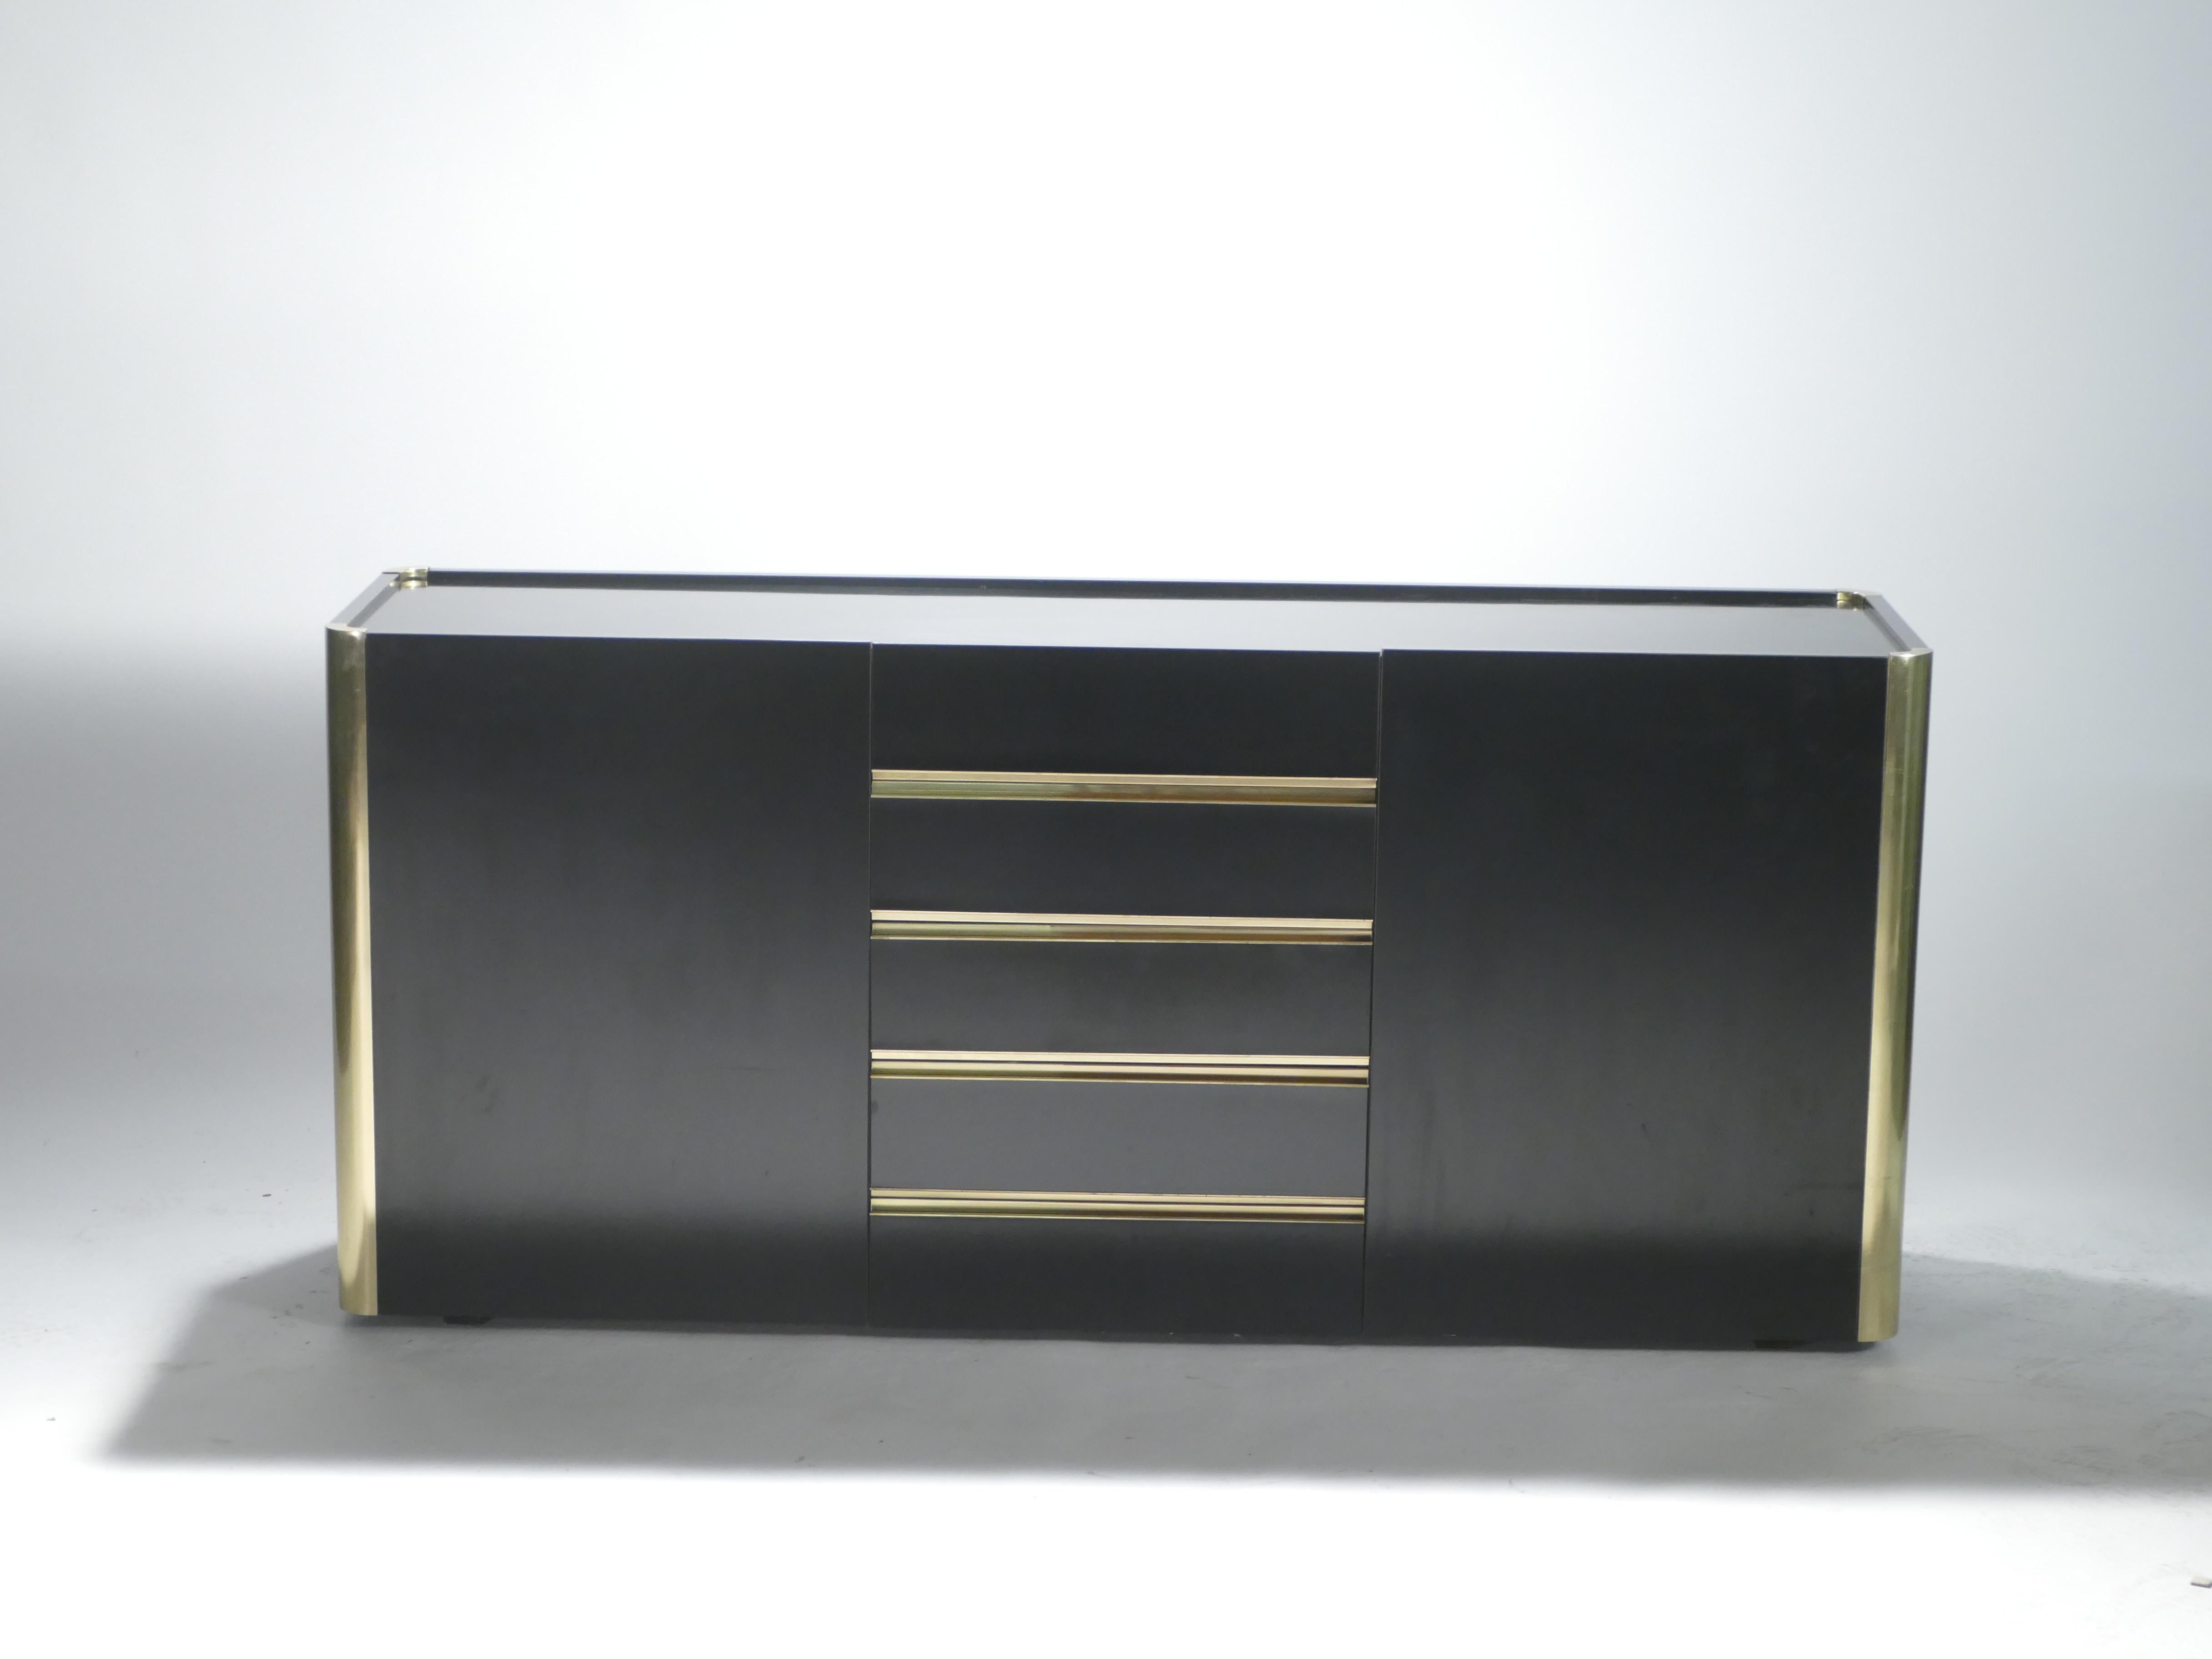 A timeless vintage piece, this midcentury sideboard feels imposing and glamorous, with thick, straight lines of brass adorning its exterior of reflective black lacquer. Made by renowned Italian designer Willy Rizzo for Mario Sabot, it’s consistent